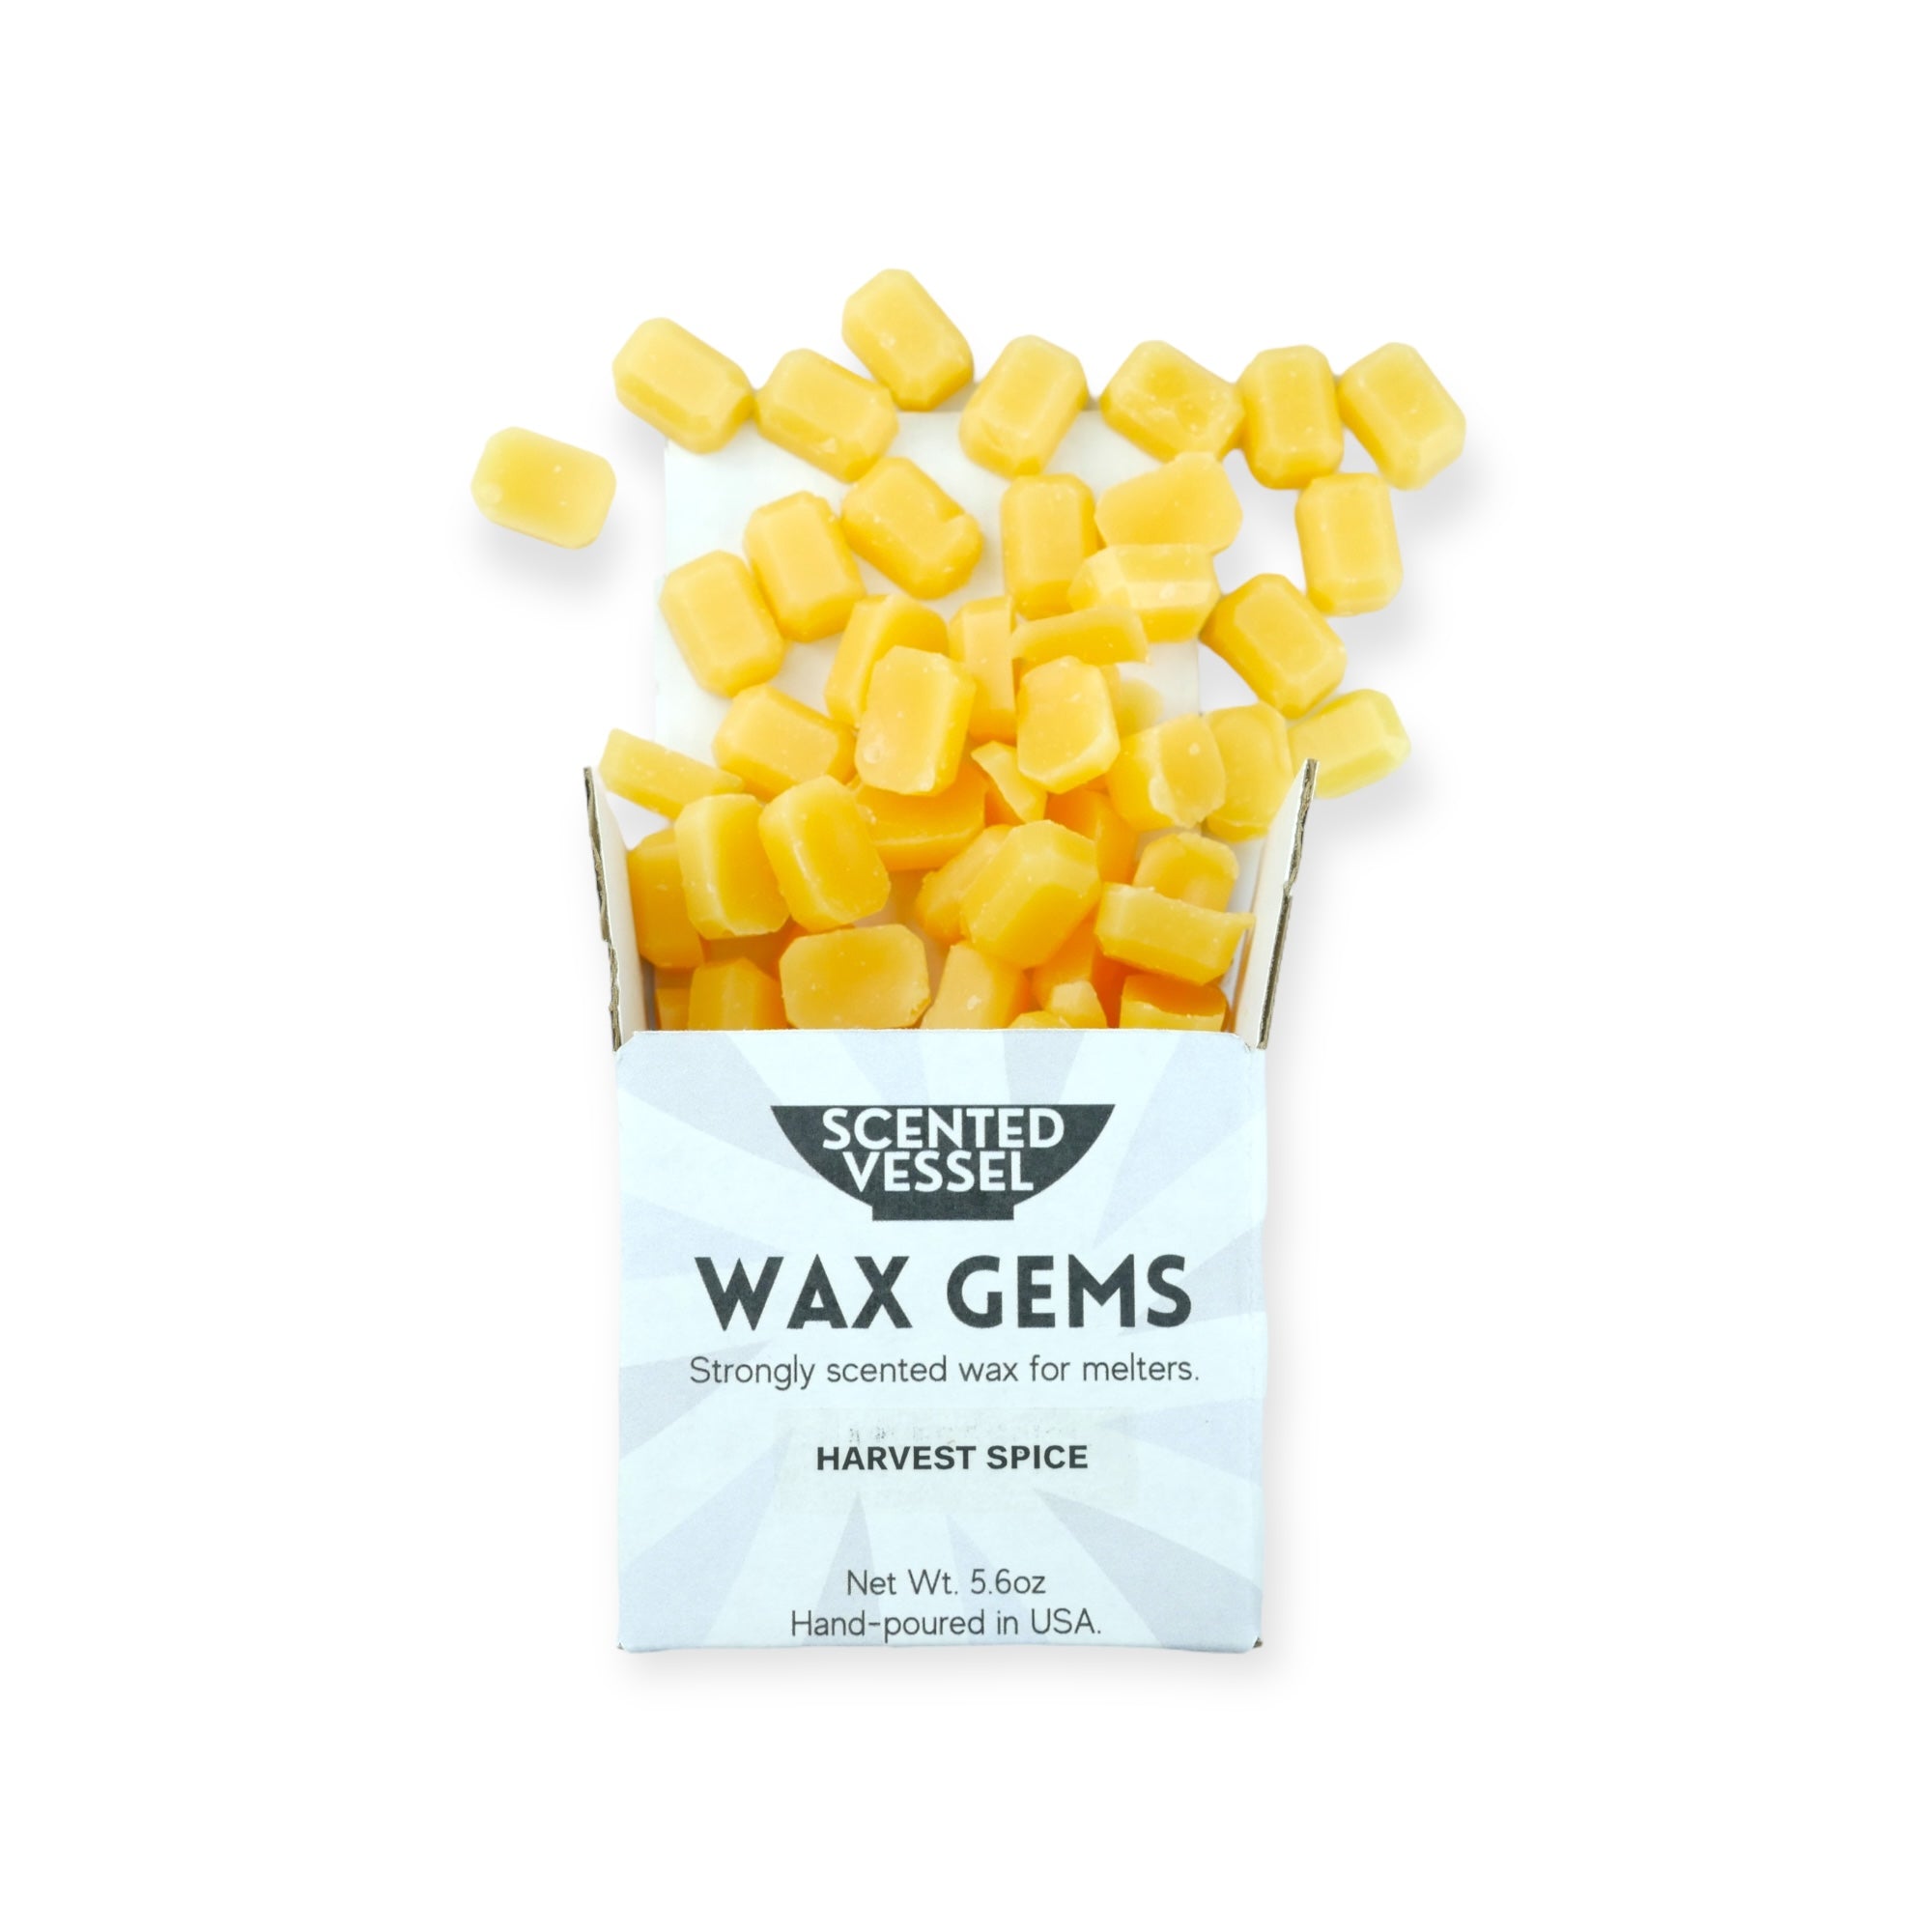 Harvest Spice 5.6oz Wax Gems by Scented Vessel